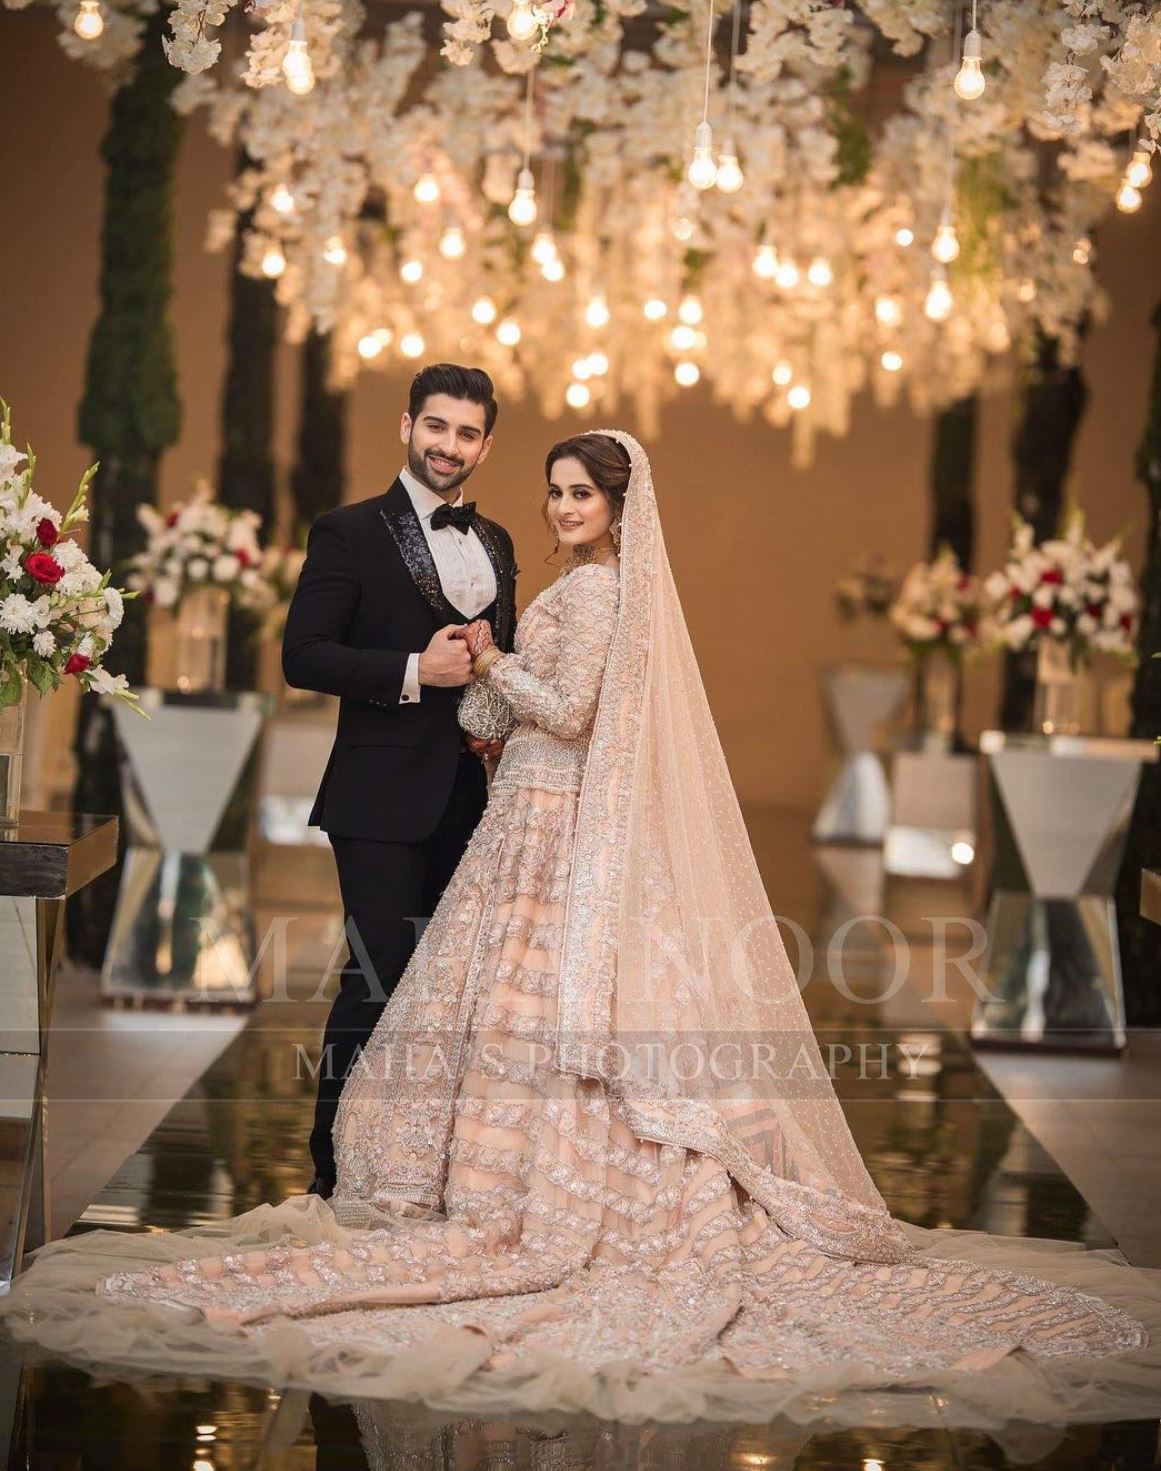 Aiman Khan Walima Exclusive Pictures & Videos